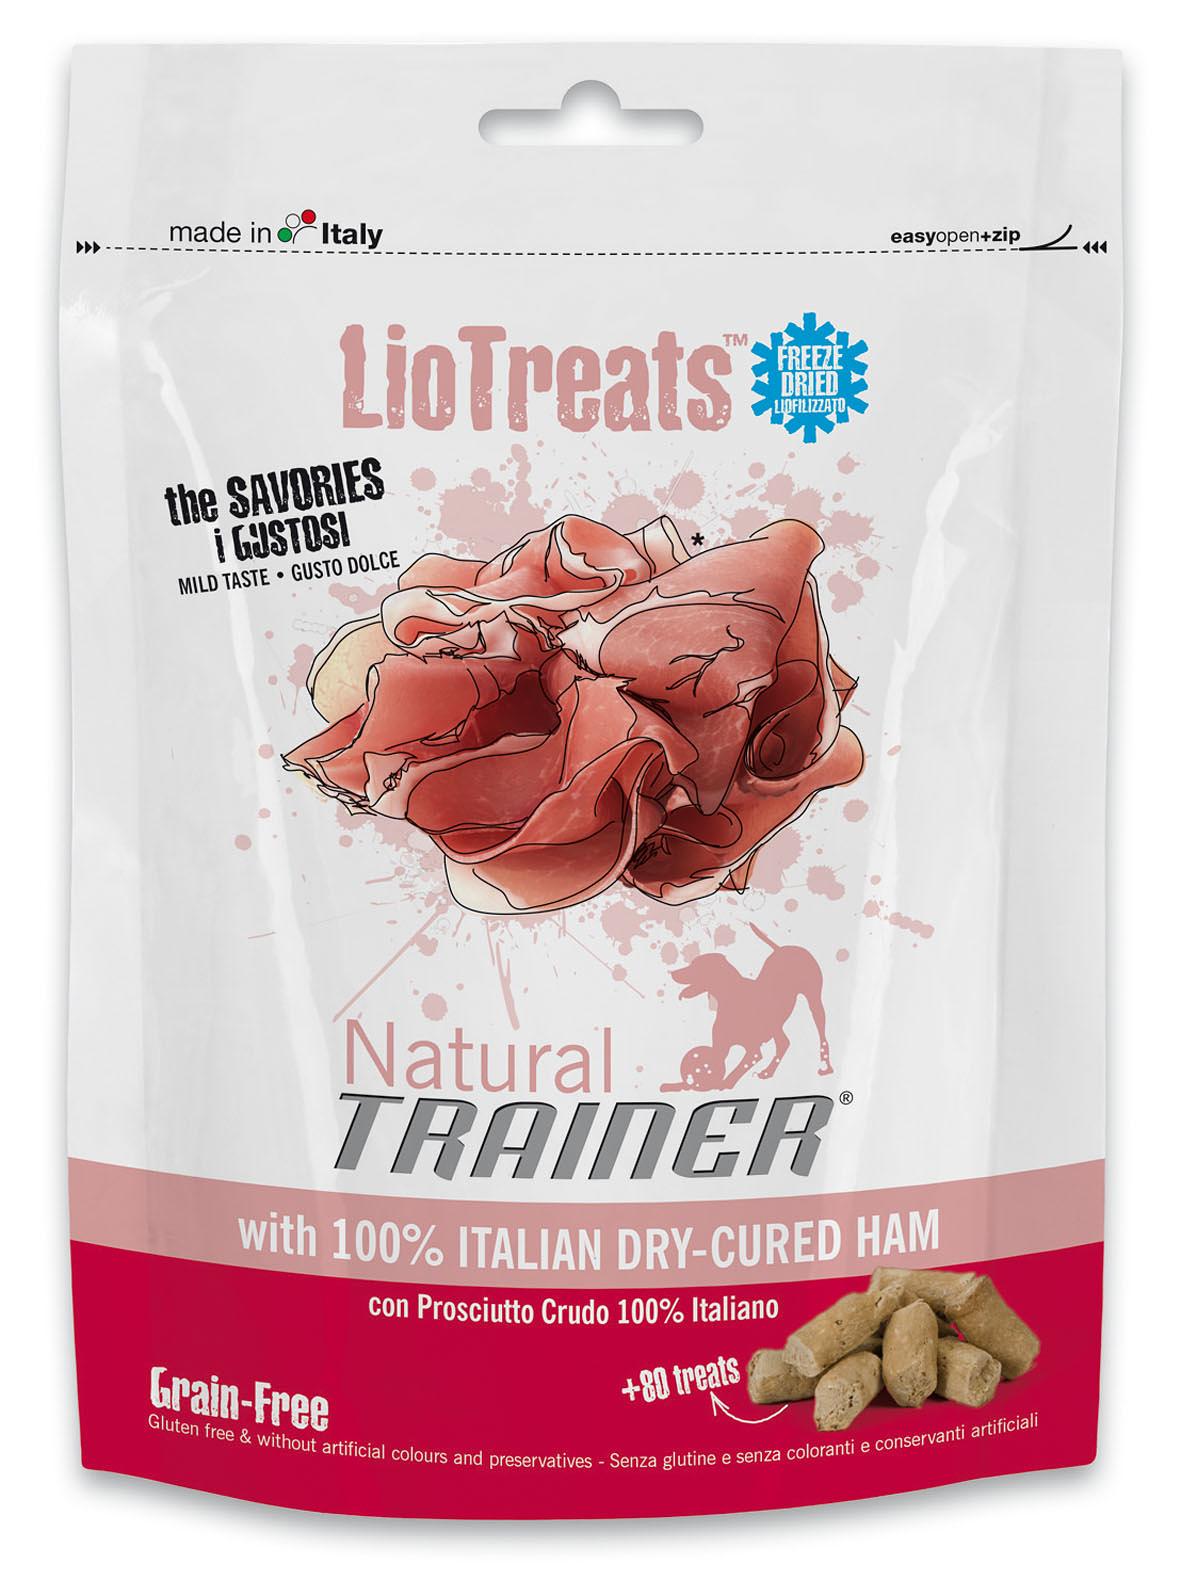 Trainer LioTreats, Natural, Dry-cured ham